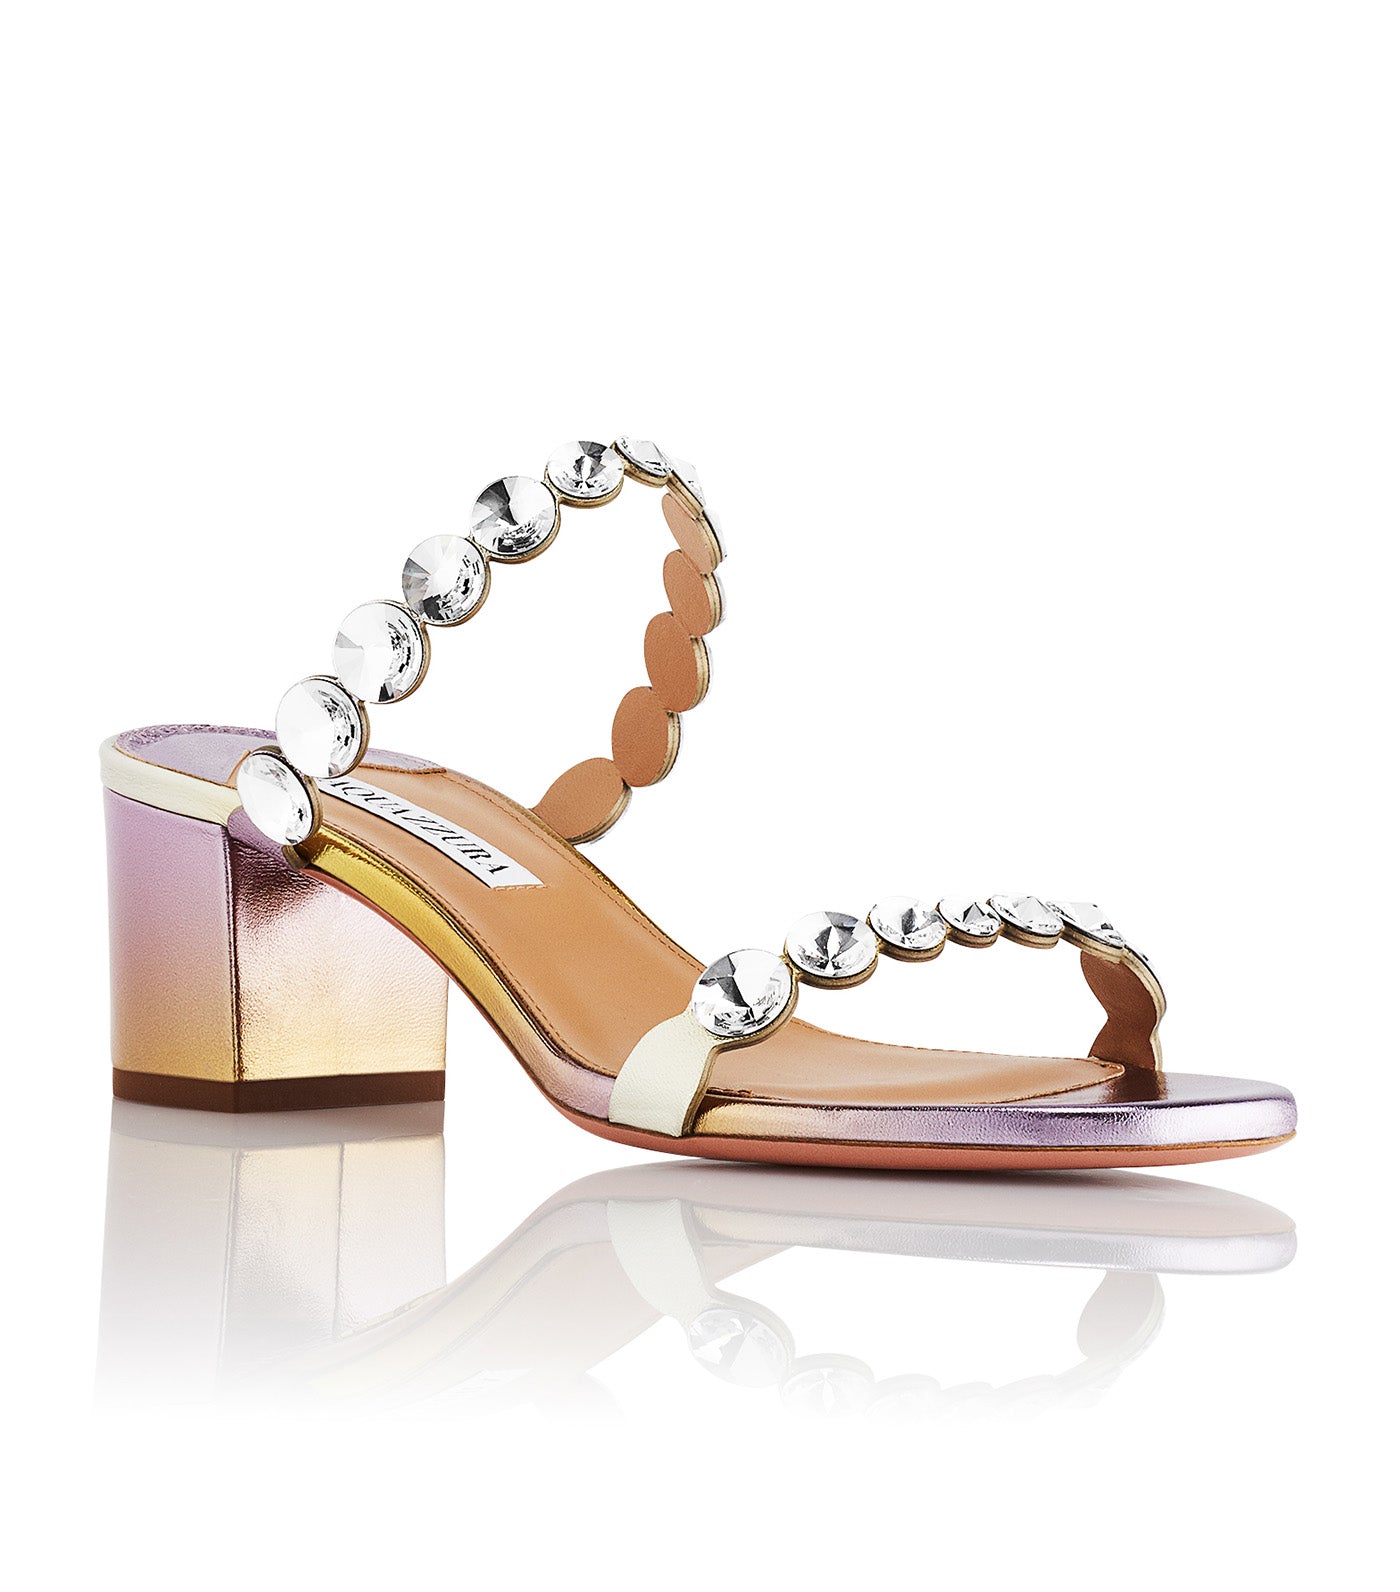 Maxi-Tequila Sandals 50 Northern Light